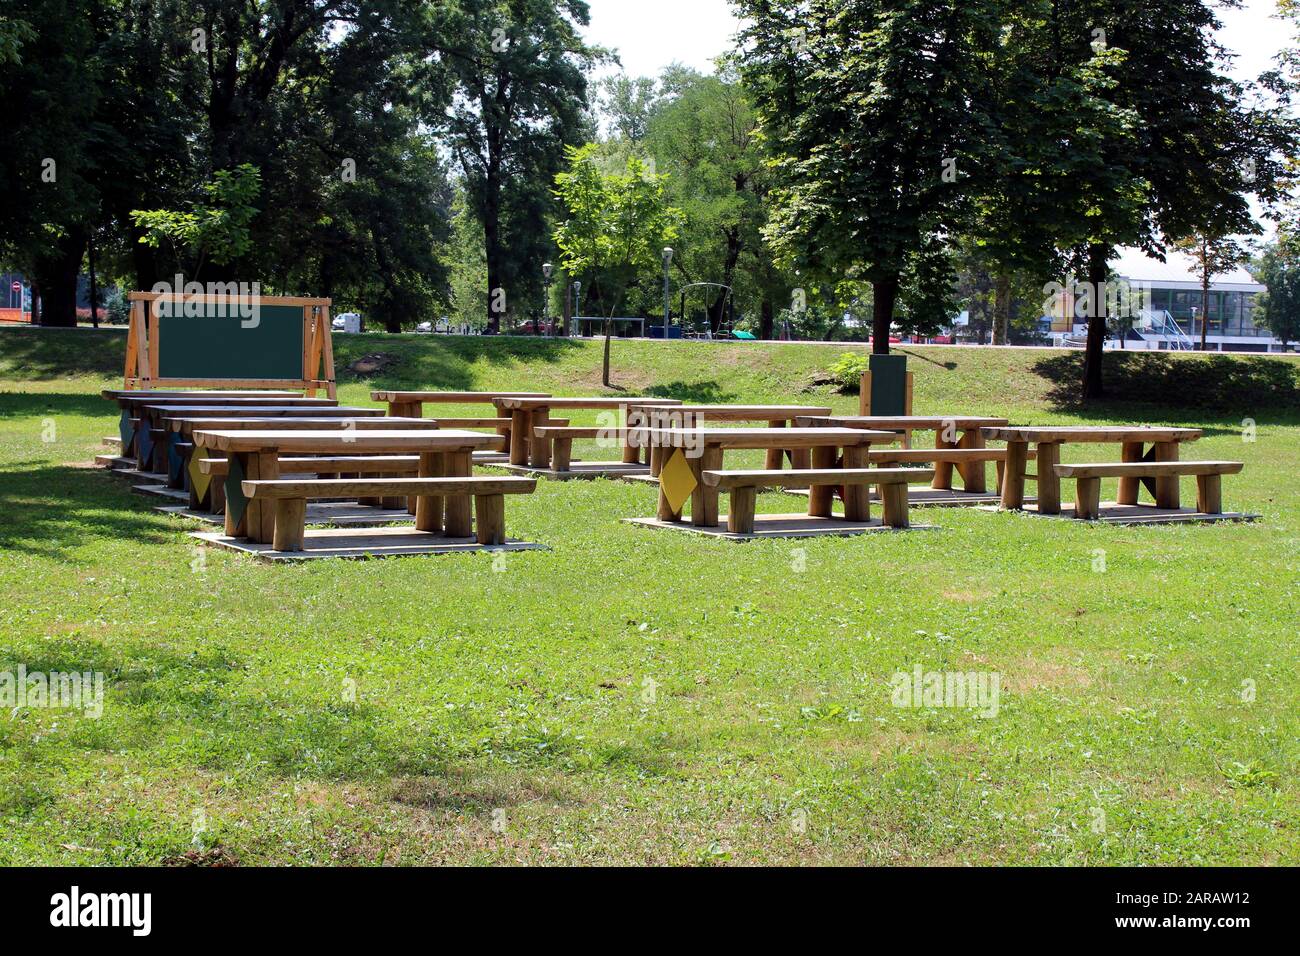 Outdoor classroom with blackboard tables and benches made from strong wooden logs in local public park surrounded with grass and tall trees Stock Photo